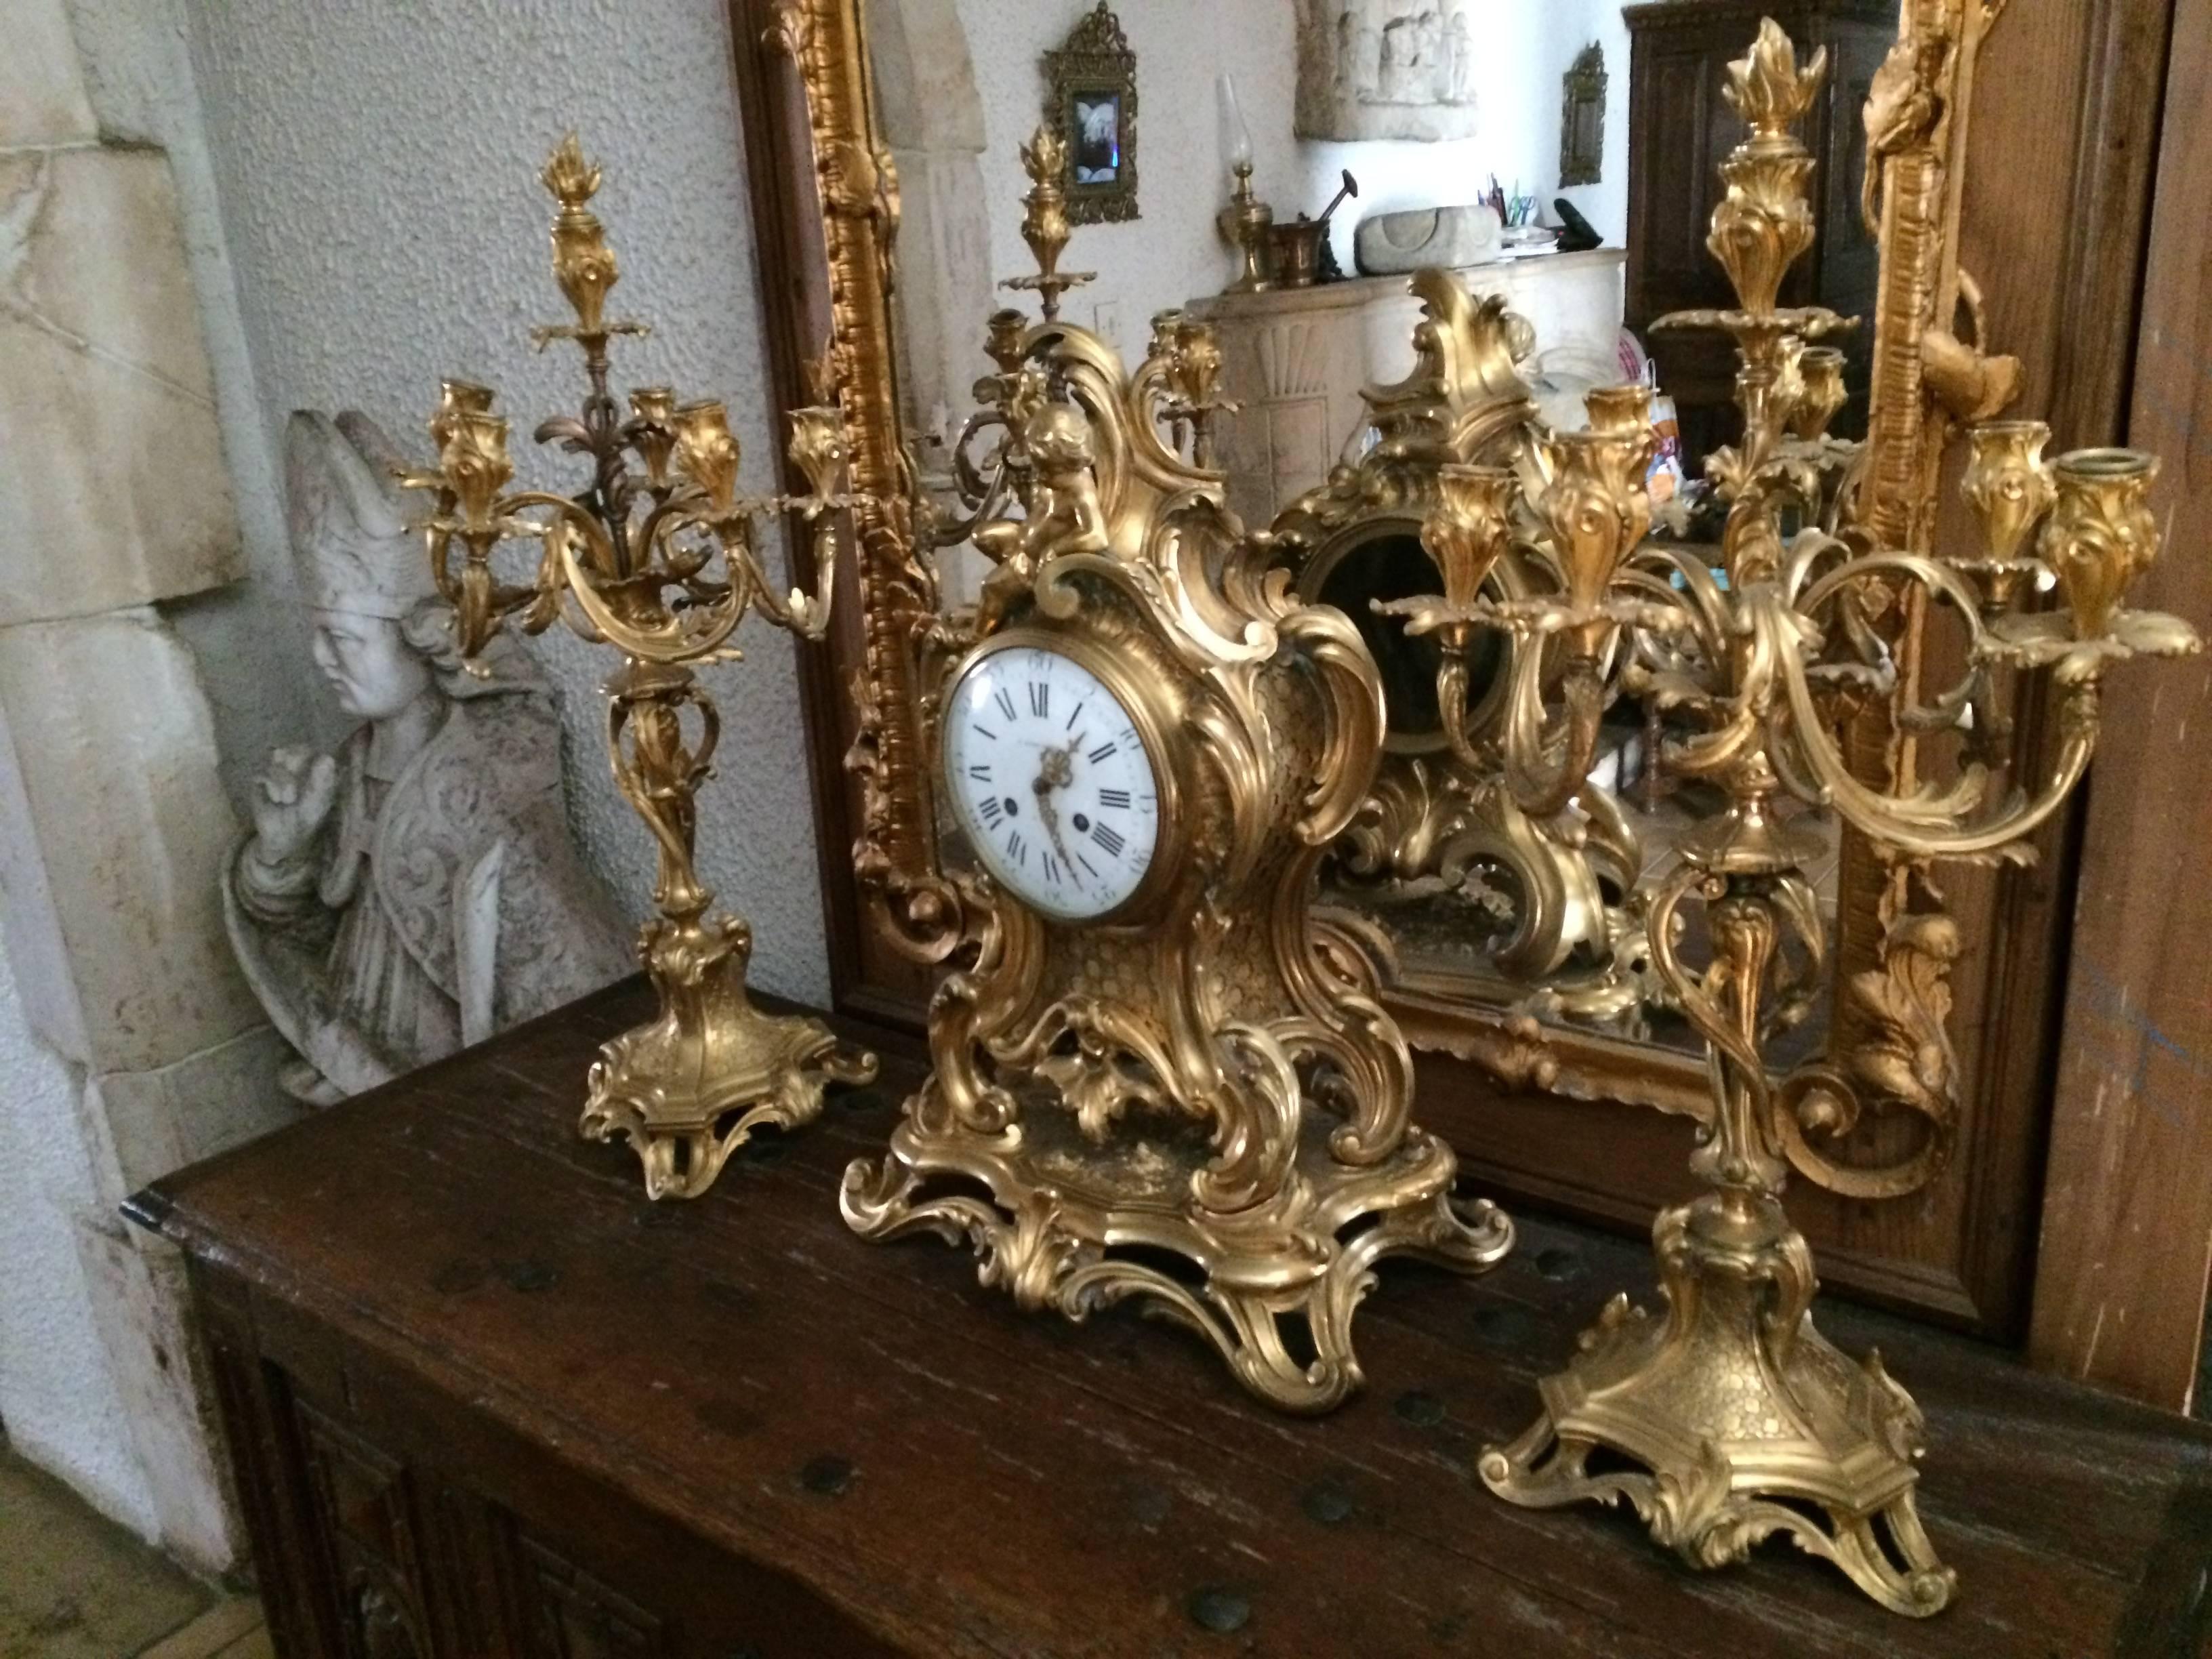 An exceptional, rare museum quality in solid gold-bronze clock and its original pair of candelabres, signed Barbedienne, 19th century, authentic, Paris.
French Parlement Louis XV style provenance.
In exquisite condition. Unique, rare and finally